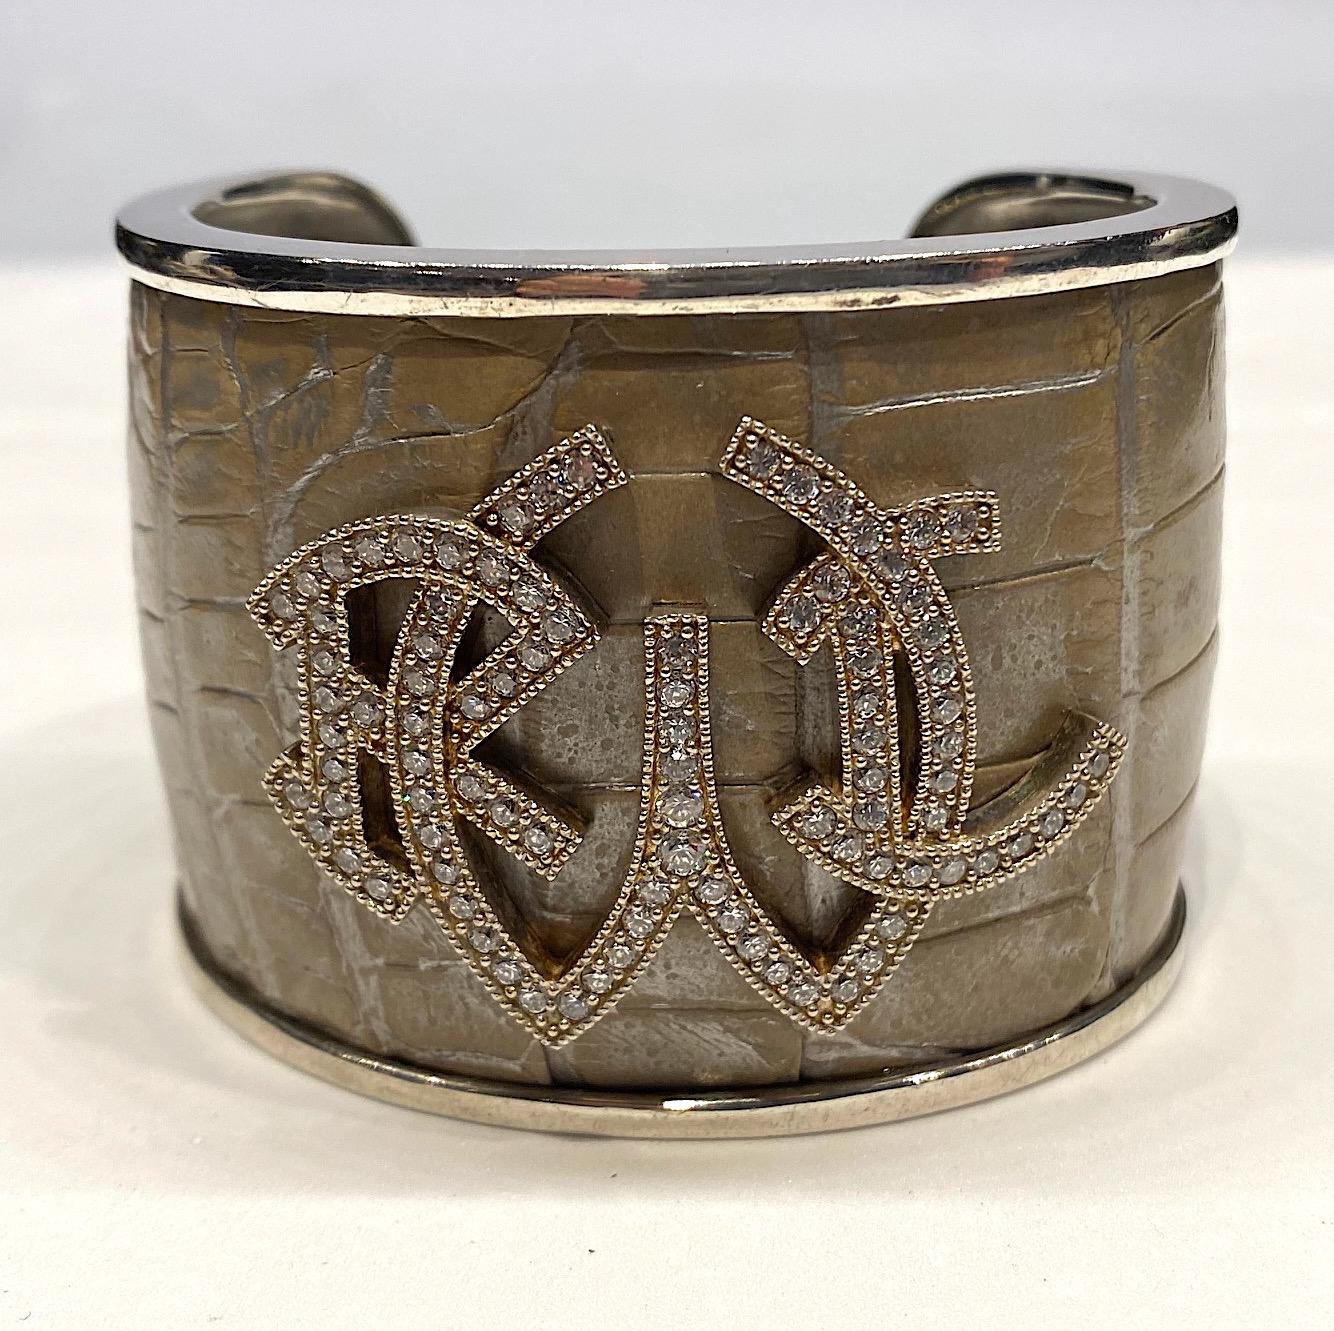 Heavy Ralph Lauren sterling silver cuff with stamped color leather in an alligator pattern. The leather is a combination of metallic matt silver and beige. The cuff is 2 inches wide and 7.25 long with 1.25 inch opening in the back. The front of the